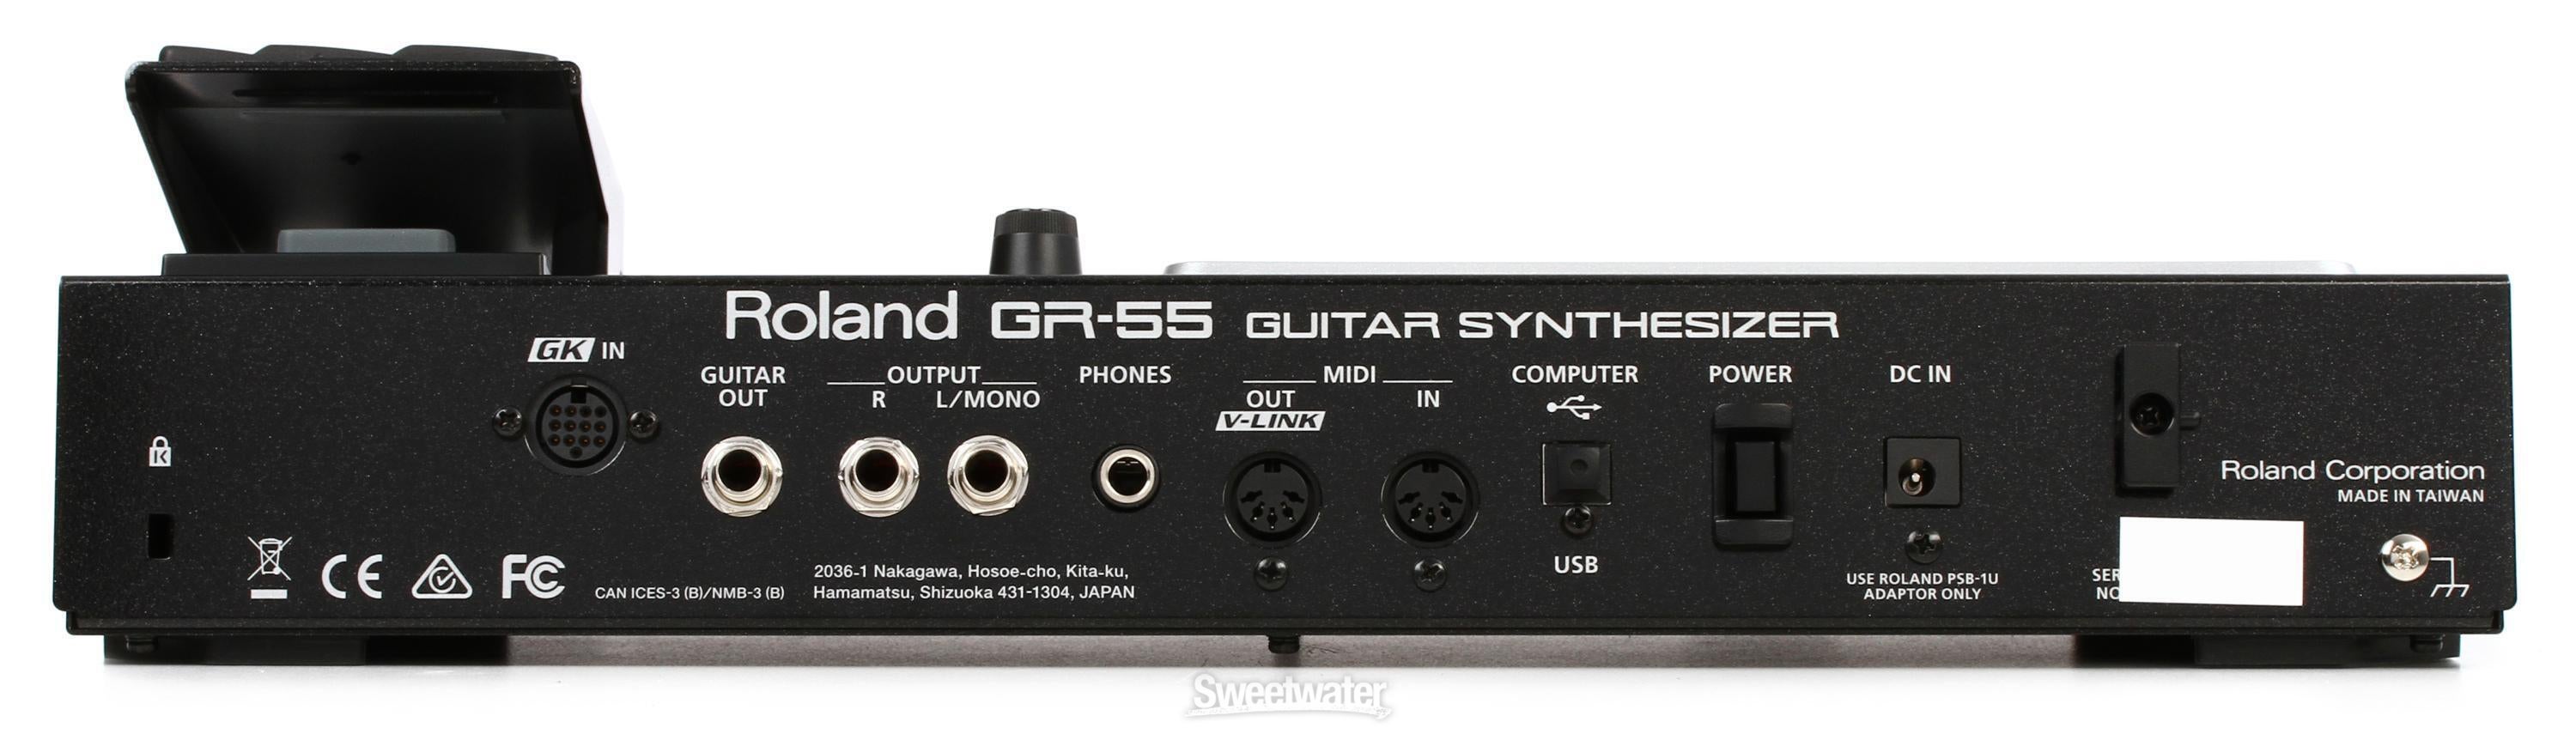 Roland GR-55 Guitar Synthesizer (GK-3 Pickup not included 